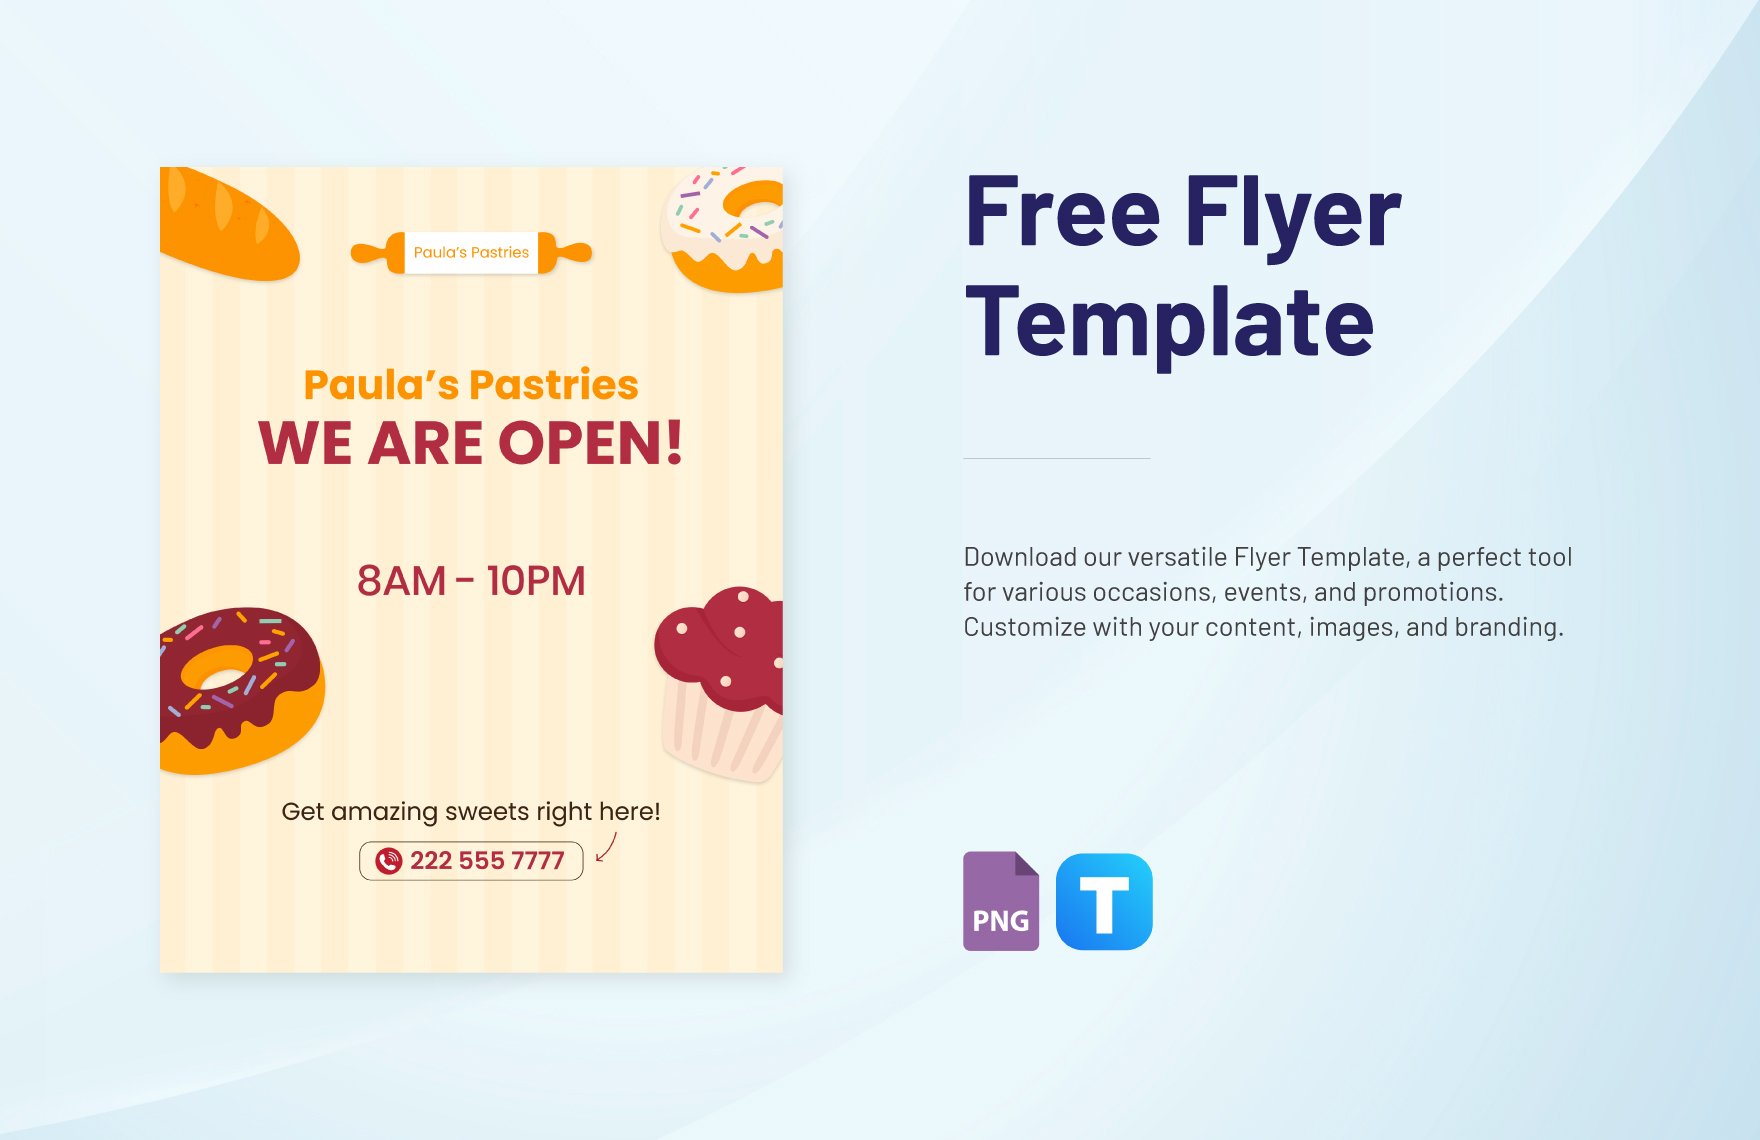 Flyer Template in PNG